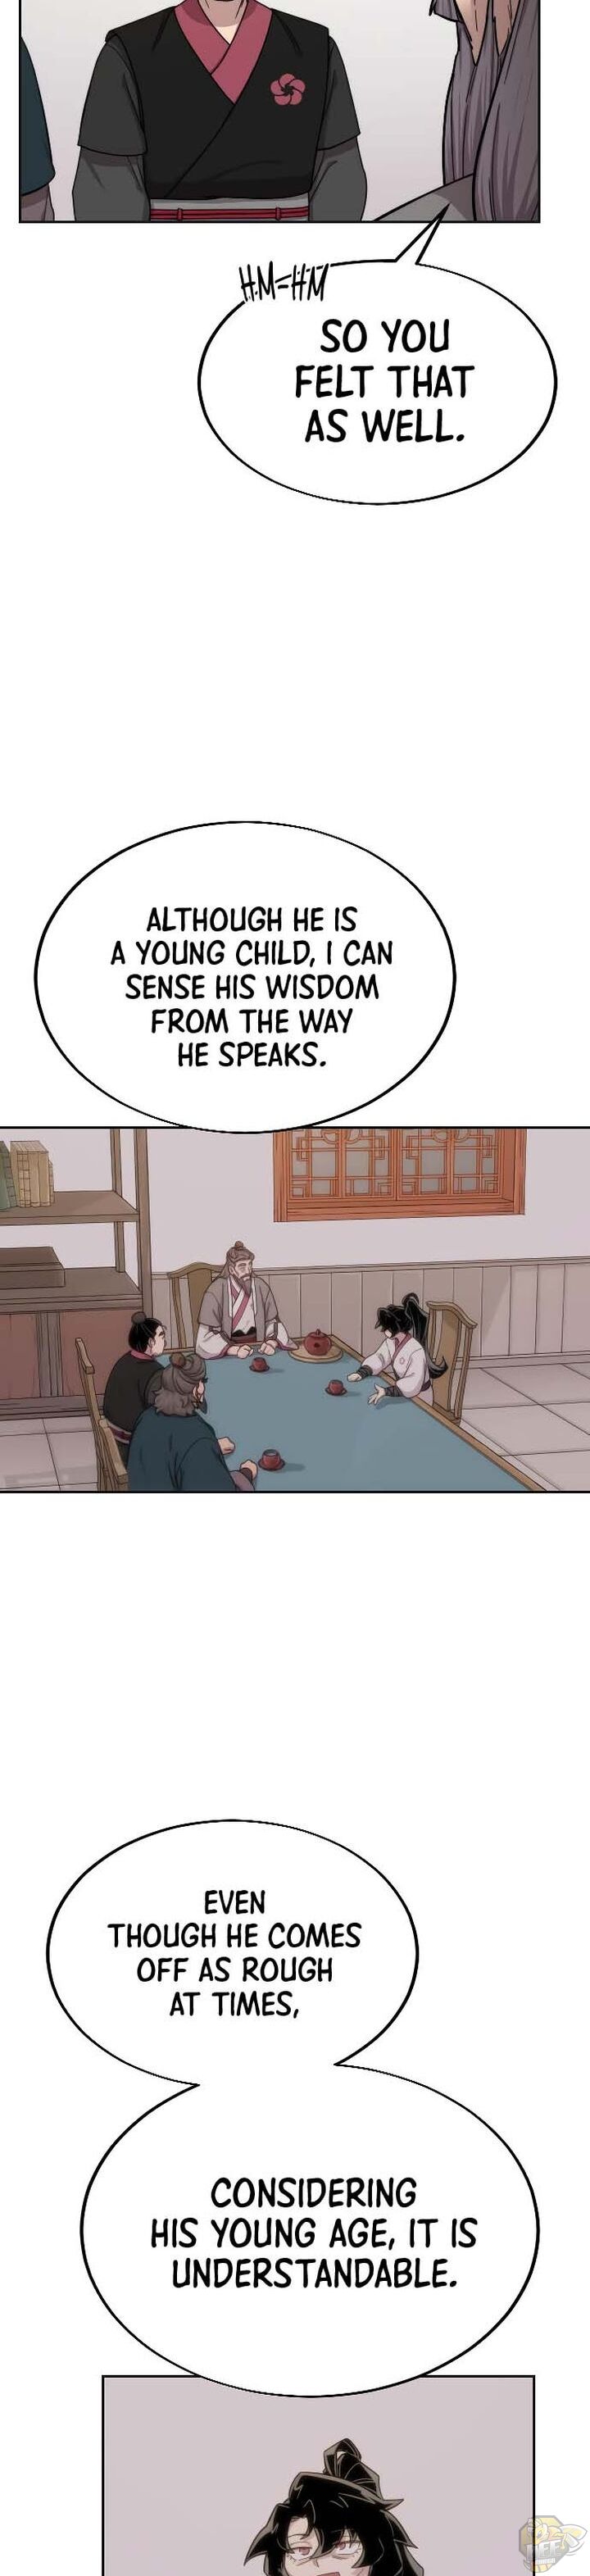 Return of the Mount Hua Sect Chapter 15 - MyToon.net